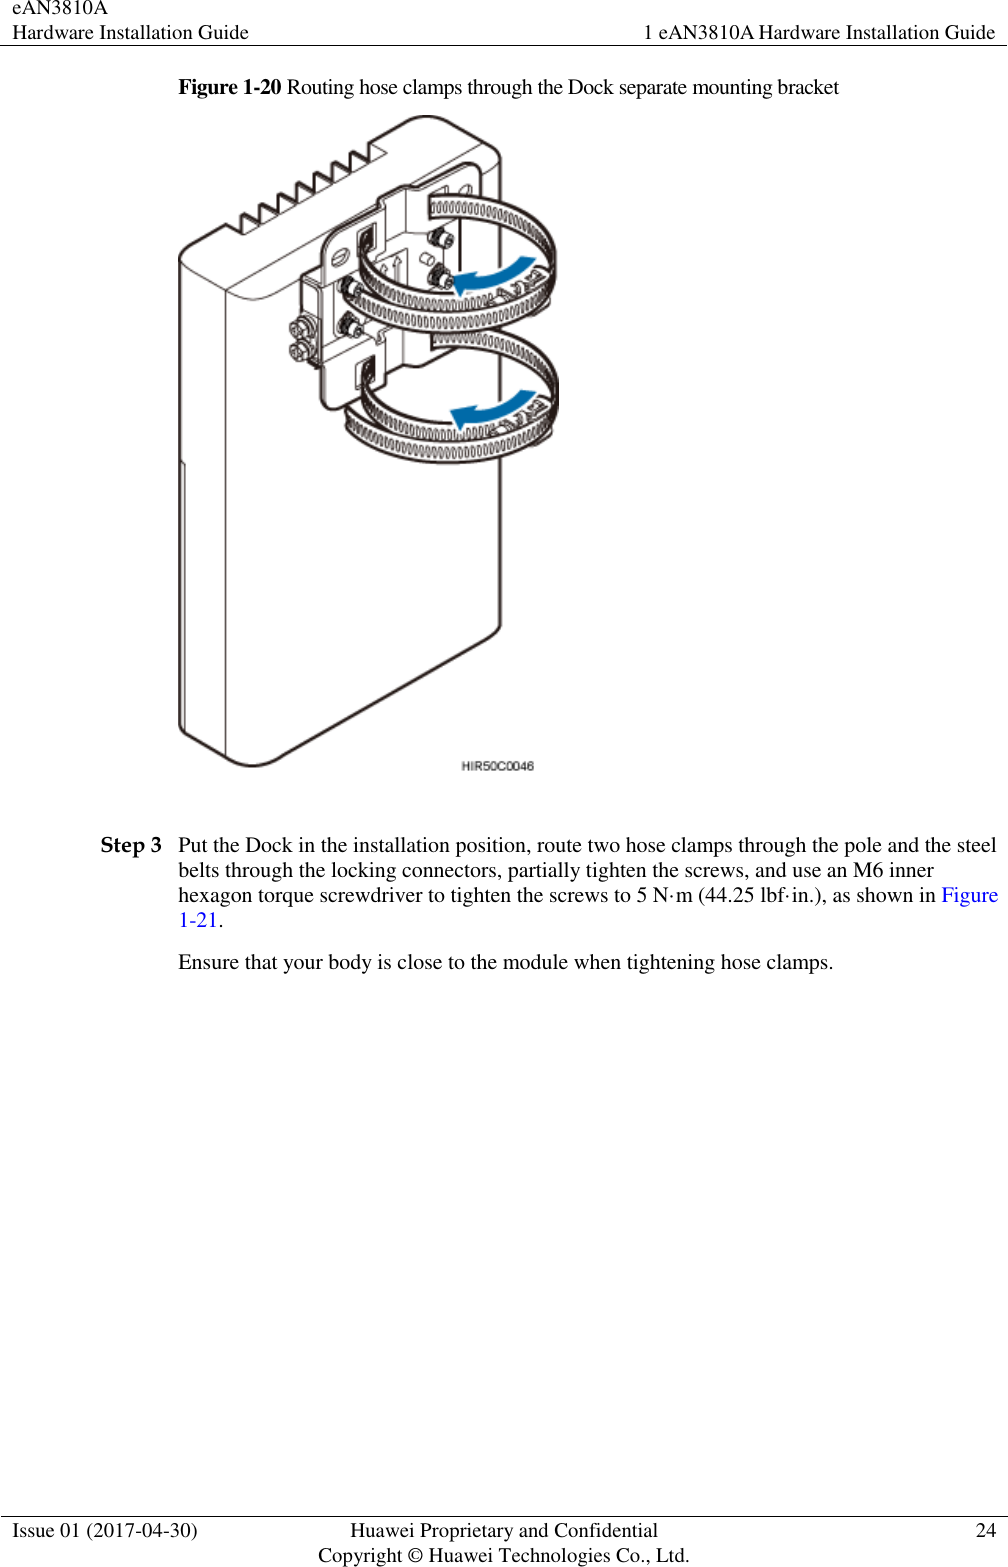 eAN3810A   Hardware Installation Guide 1 eAN3810A Hardware Installation Guide  Issue 01 (2017-04-30) Huawei Proprietary and Confidential                                     Copyright © Huawei Technologies Co., Ltd. 24  Figure 1-20 Routing hose clamps through the Dock separate mounting bracket   Step 3 Put the Dock in the installation position, route two hose clamps through the pole and the steel belts through the locking connectors, partially tighten the screws, and use an M6 inner hexagon torque screwdriver to tighten the screws to 5 N·m (44.25 lbf·in.), as shown in Figure 1-21. Ensure that your body is close to the module when tightening hose clamps. 